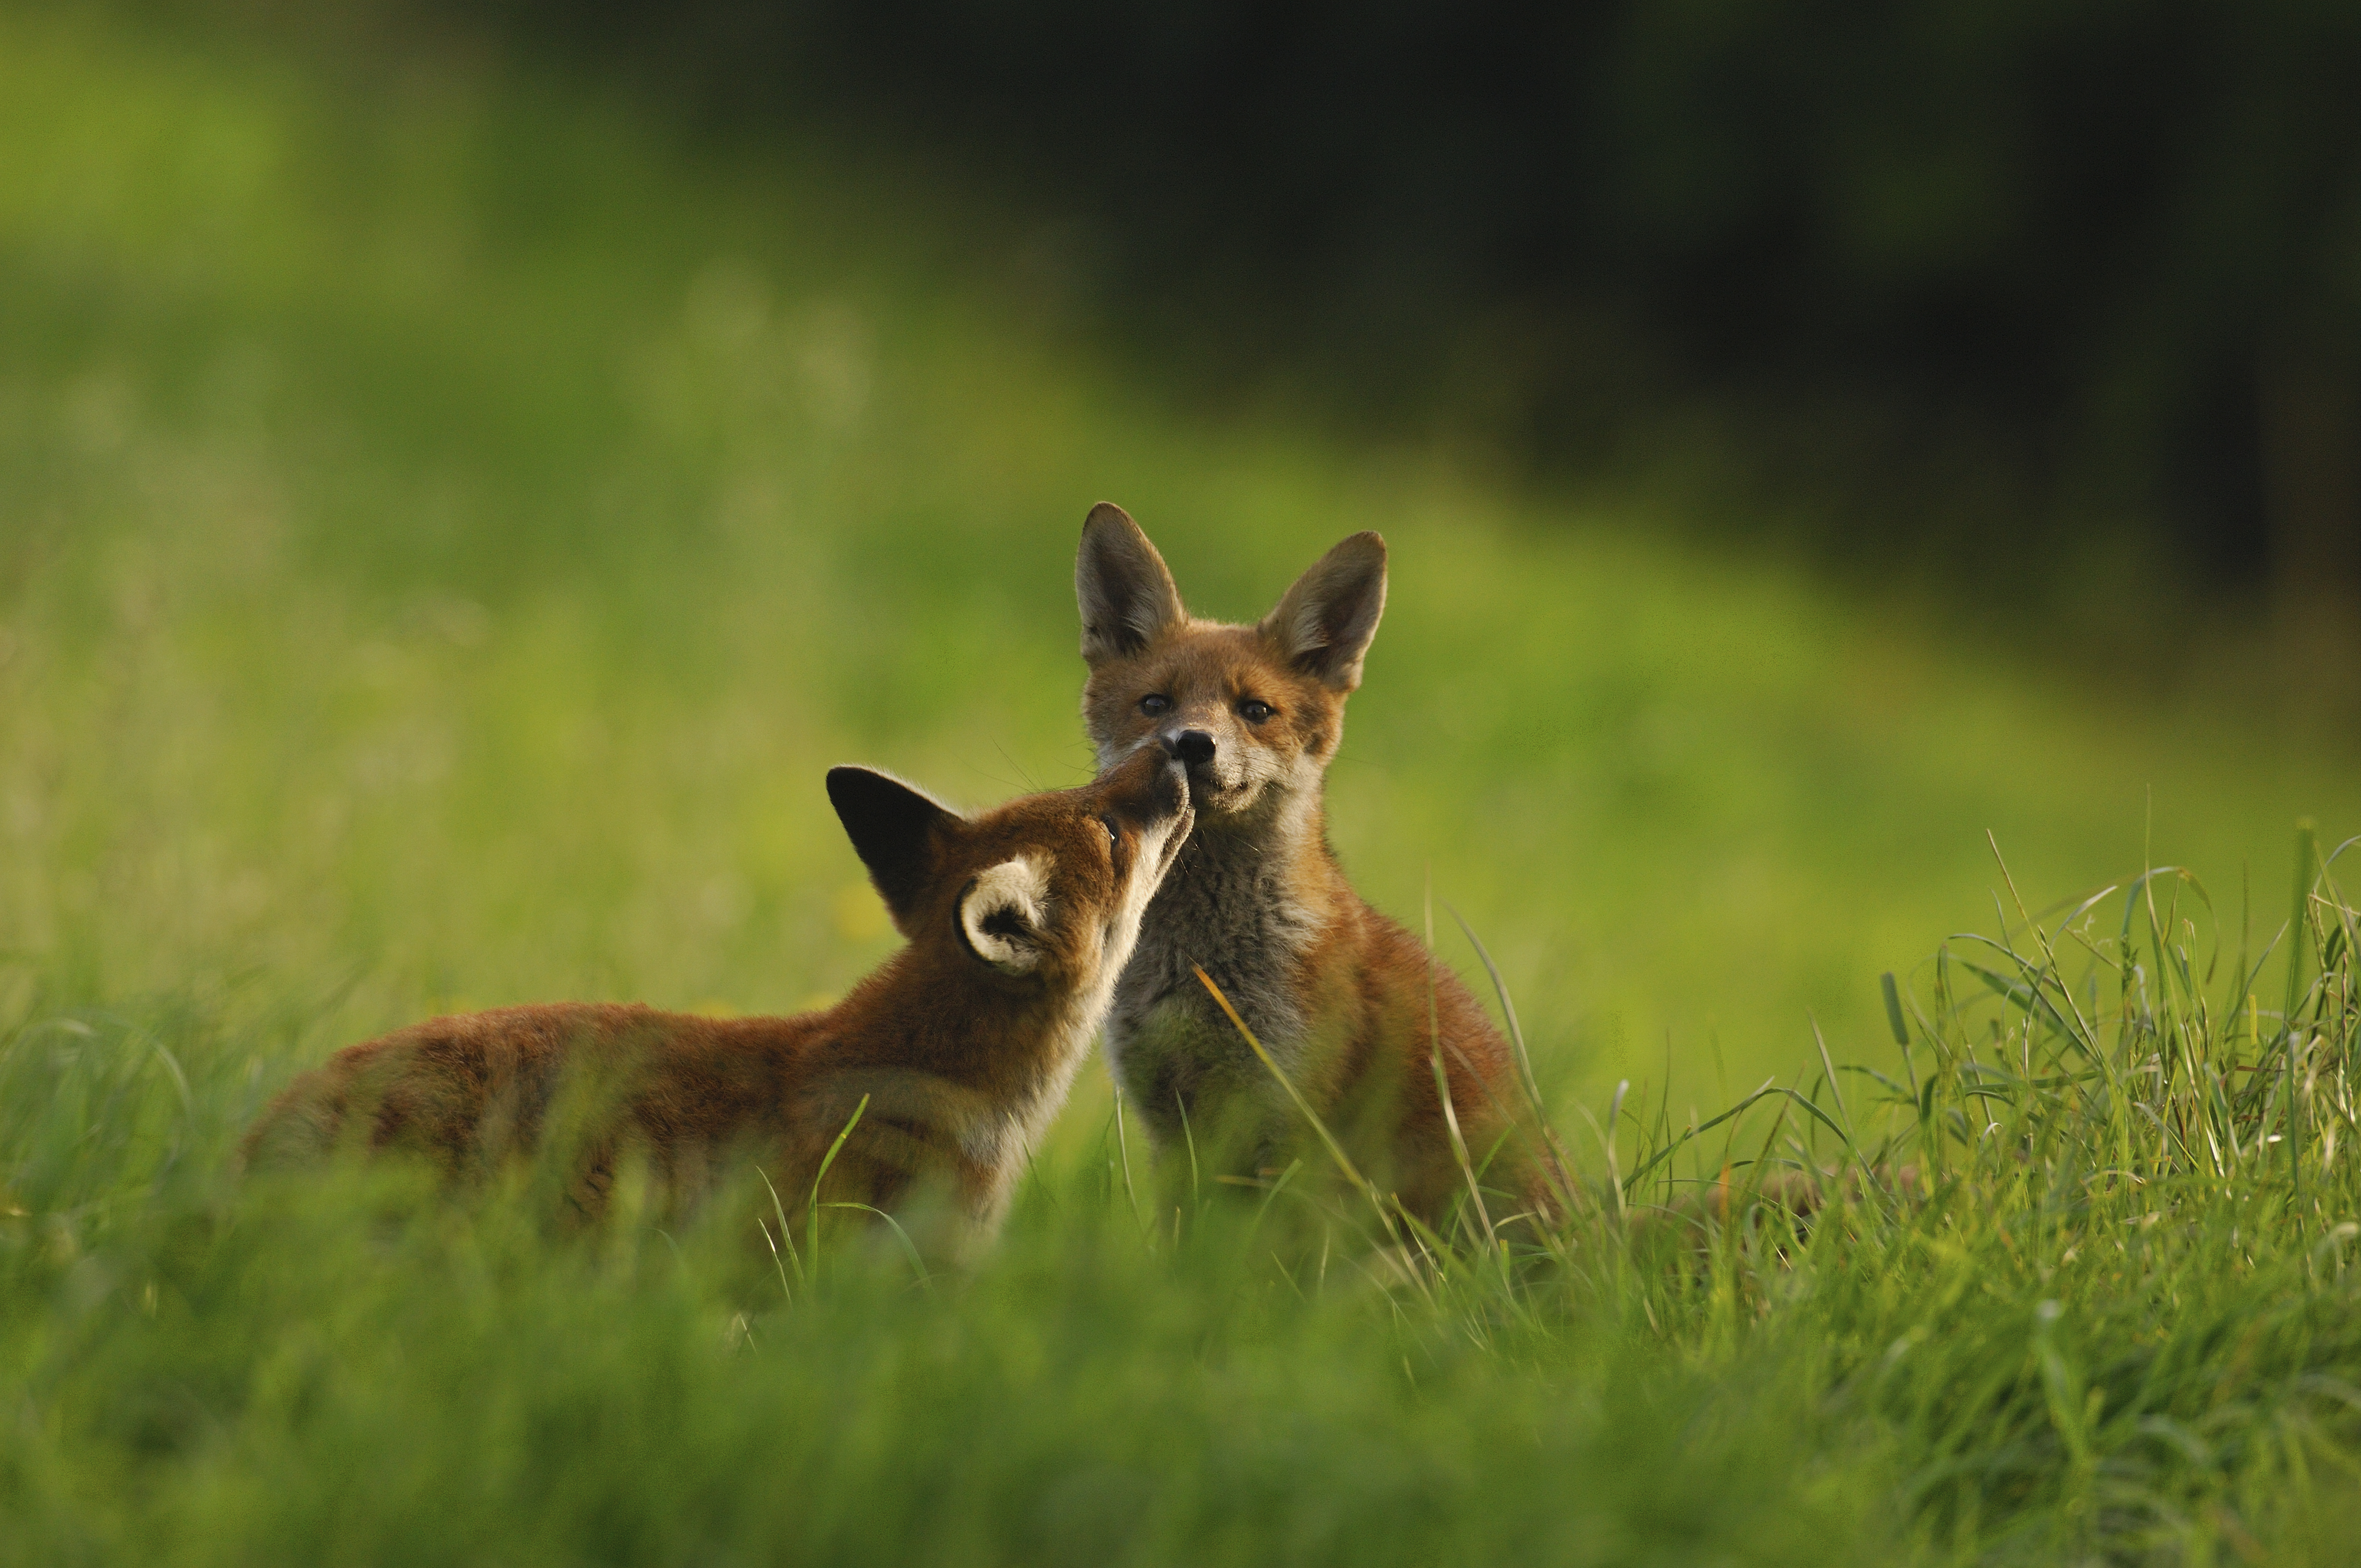 Two wild foxes playing in grass